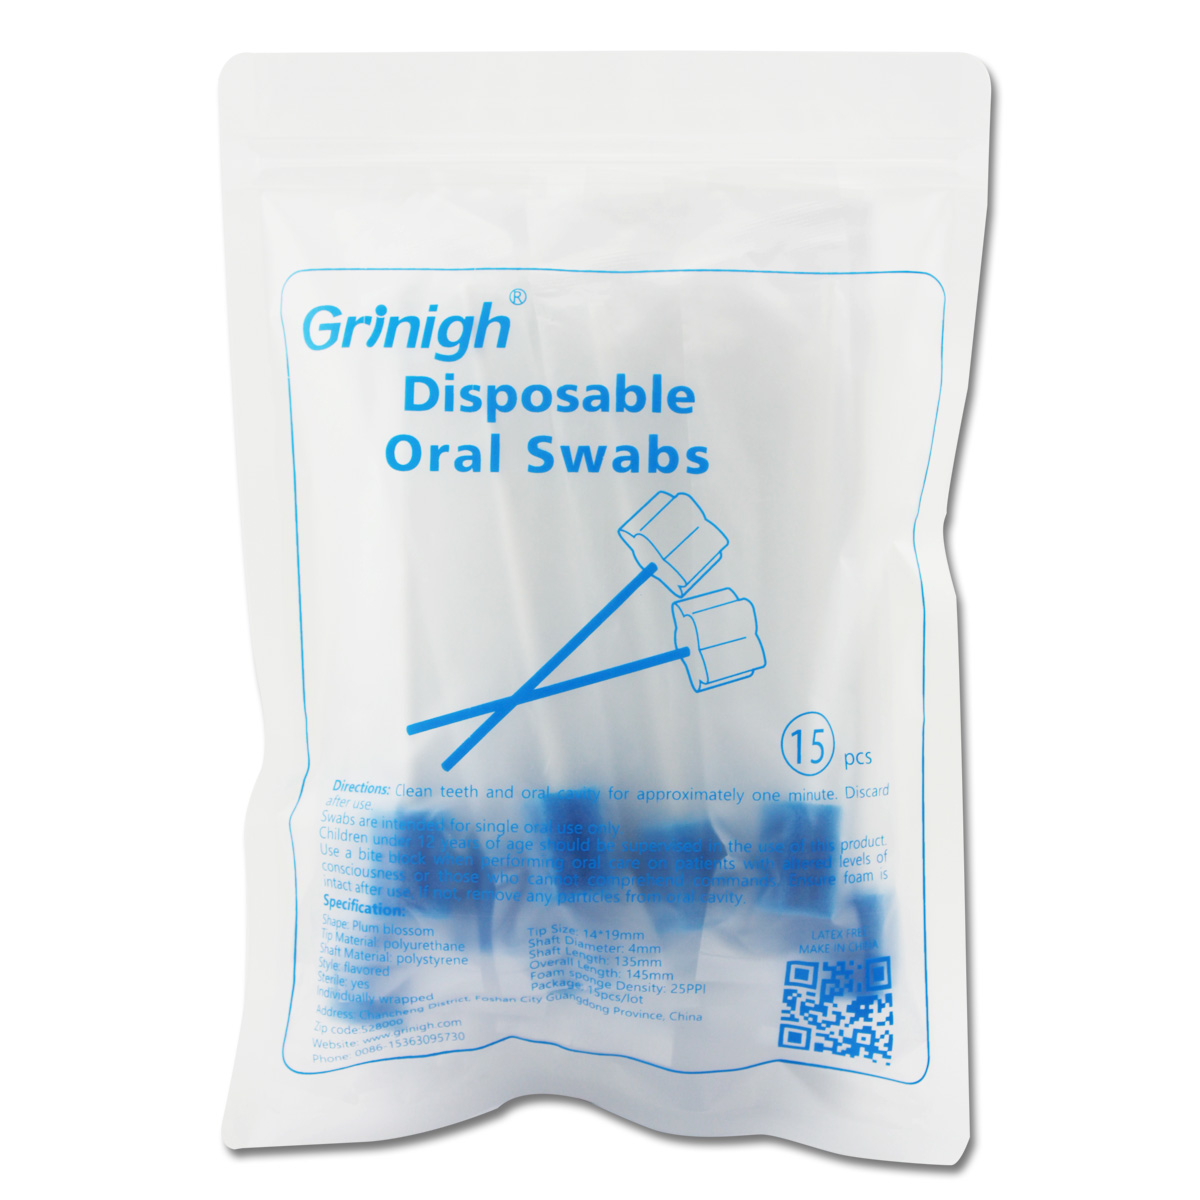 Disposable Treated Unflavored Oral Care Sponge Swabs - 15 Count Individually Wrapped Swabsticks for Oral Medical Use